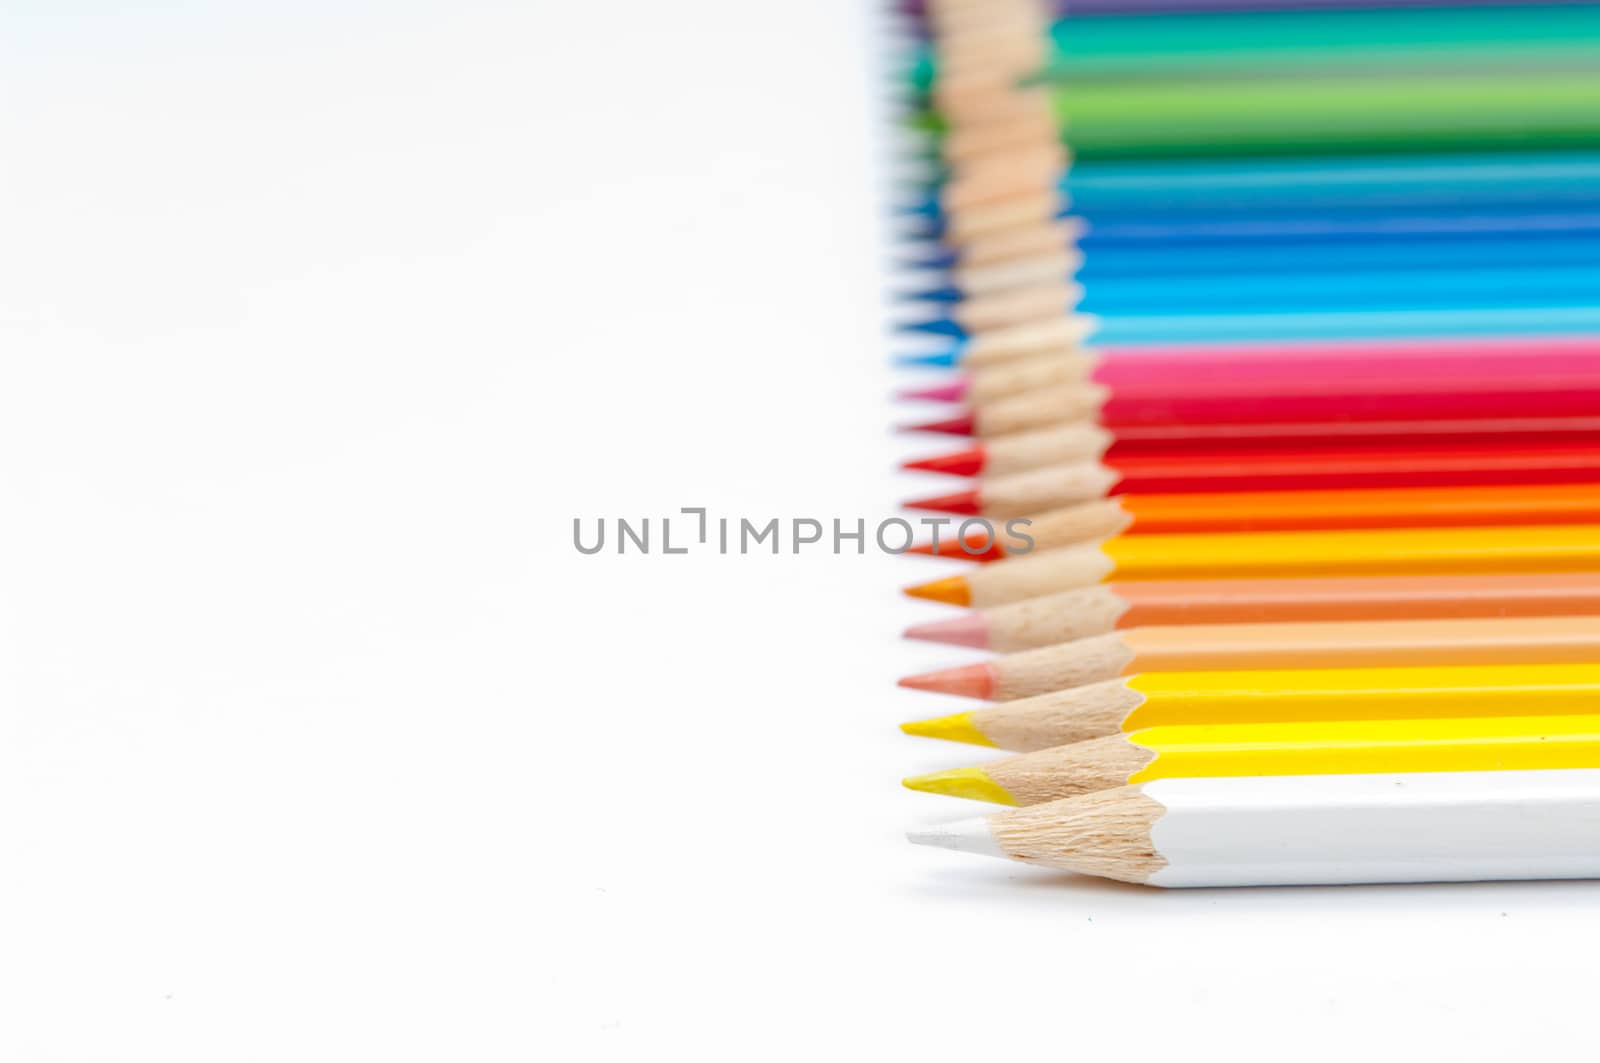 Pattern of color pencils isolated on white background close up